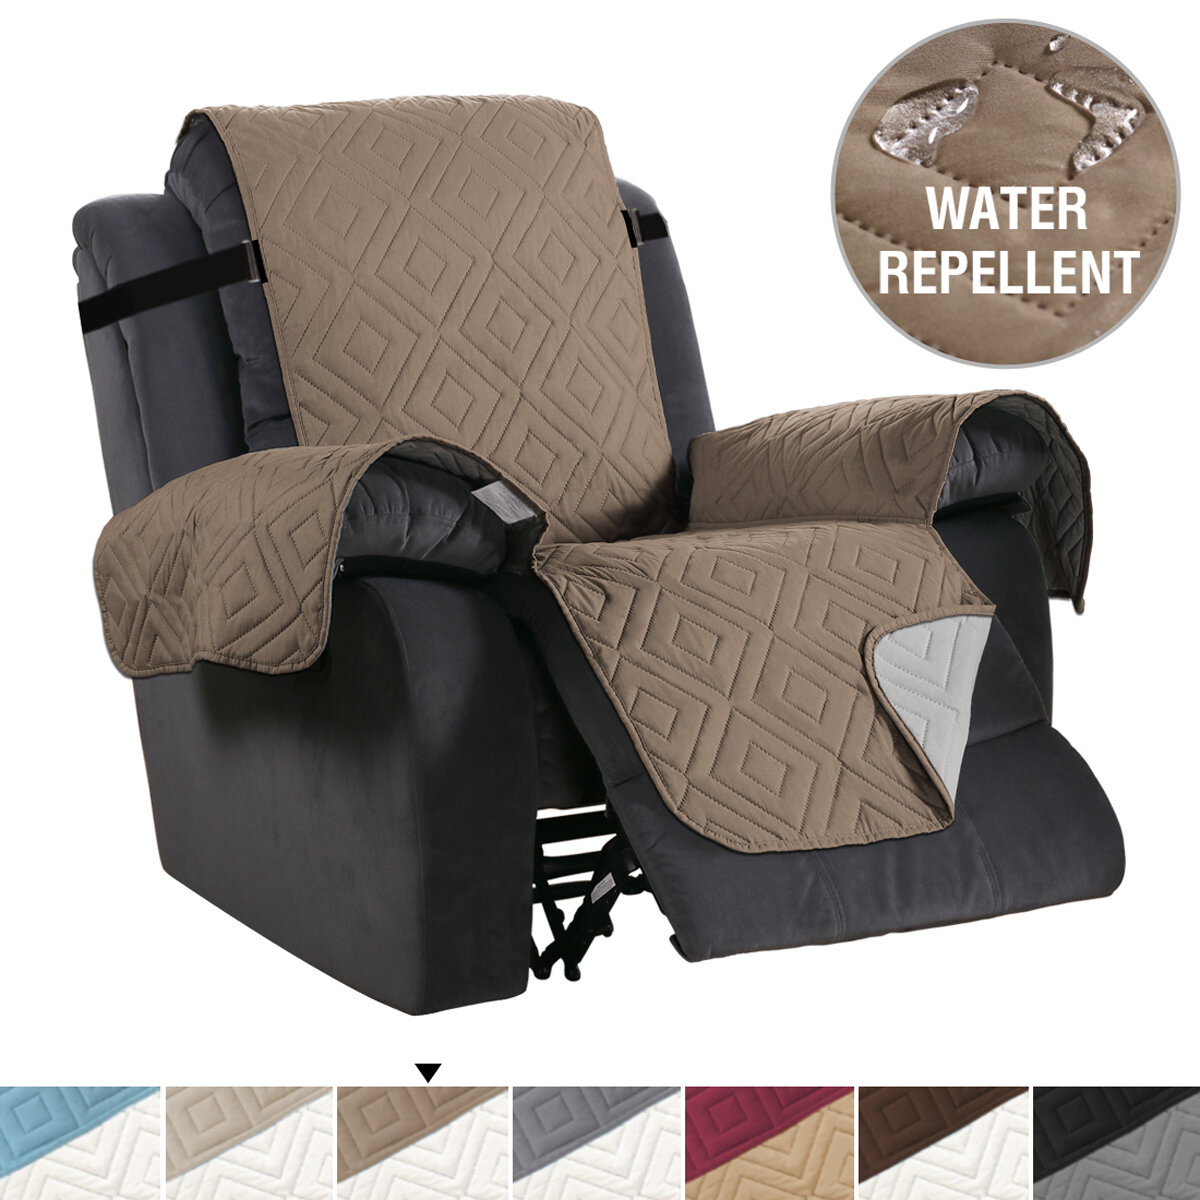 Image of 30 inch Larger Breathable Waterproof Wear-Resisting Double-Sided Available Polyester Recliner Chair Slipcover